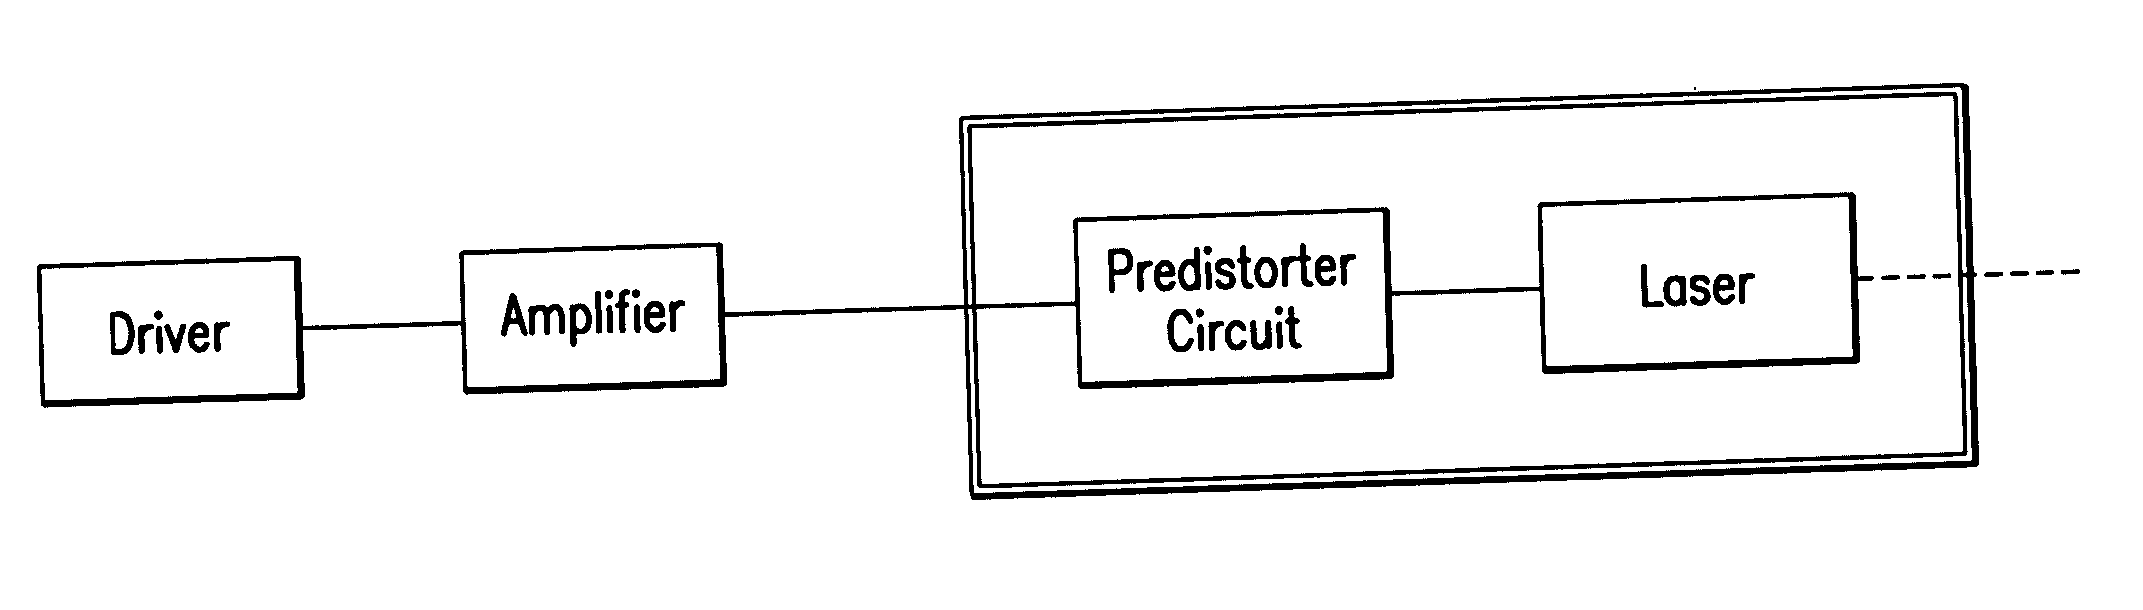 Optical transmitter with integrated amplifier and pre-distortion circuit